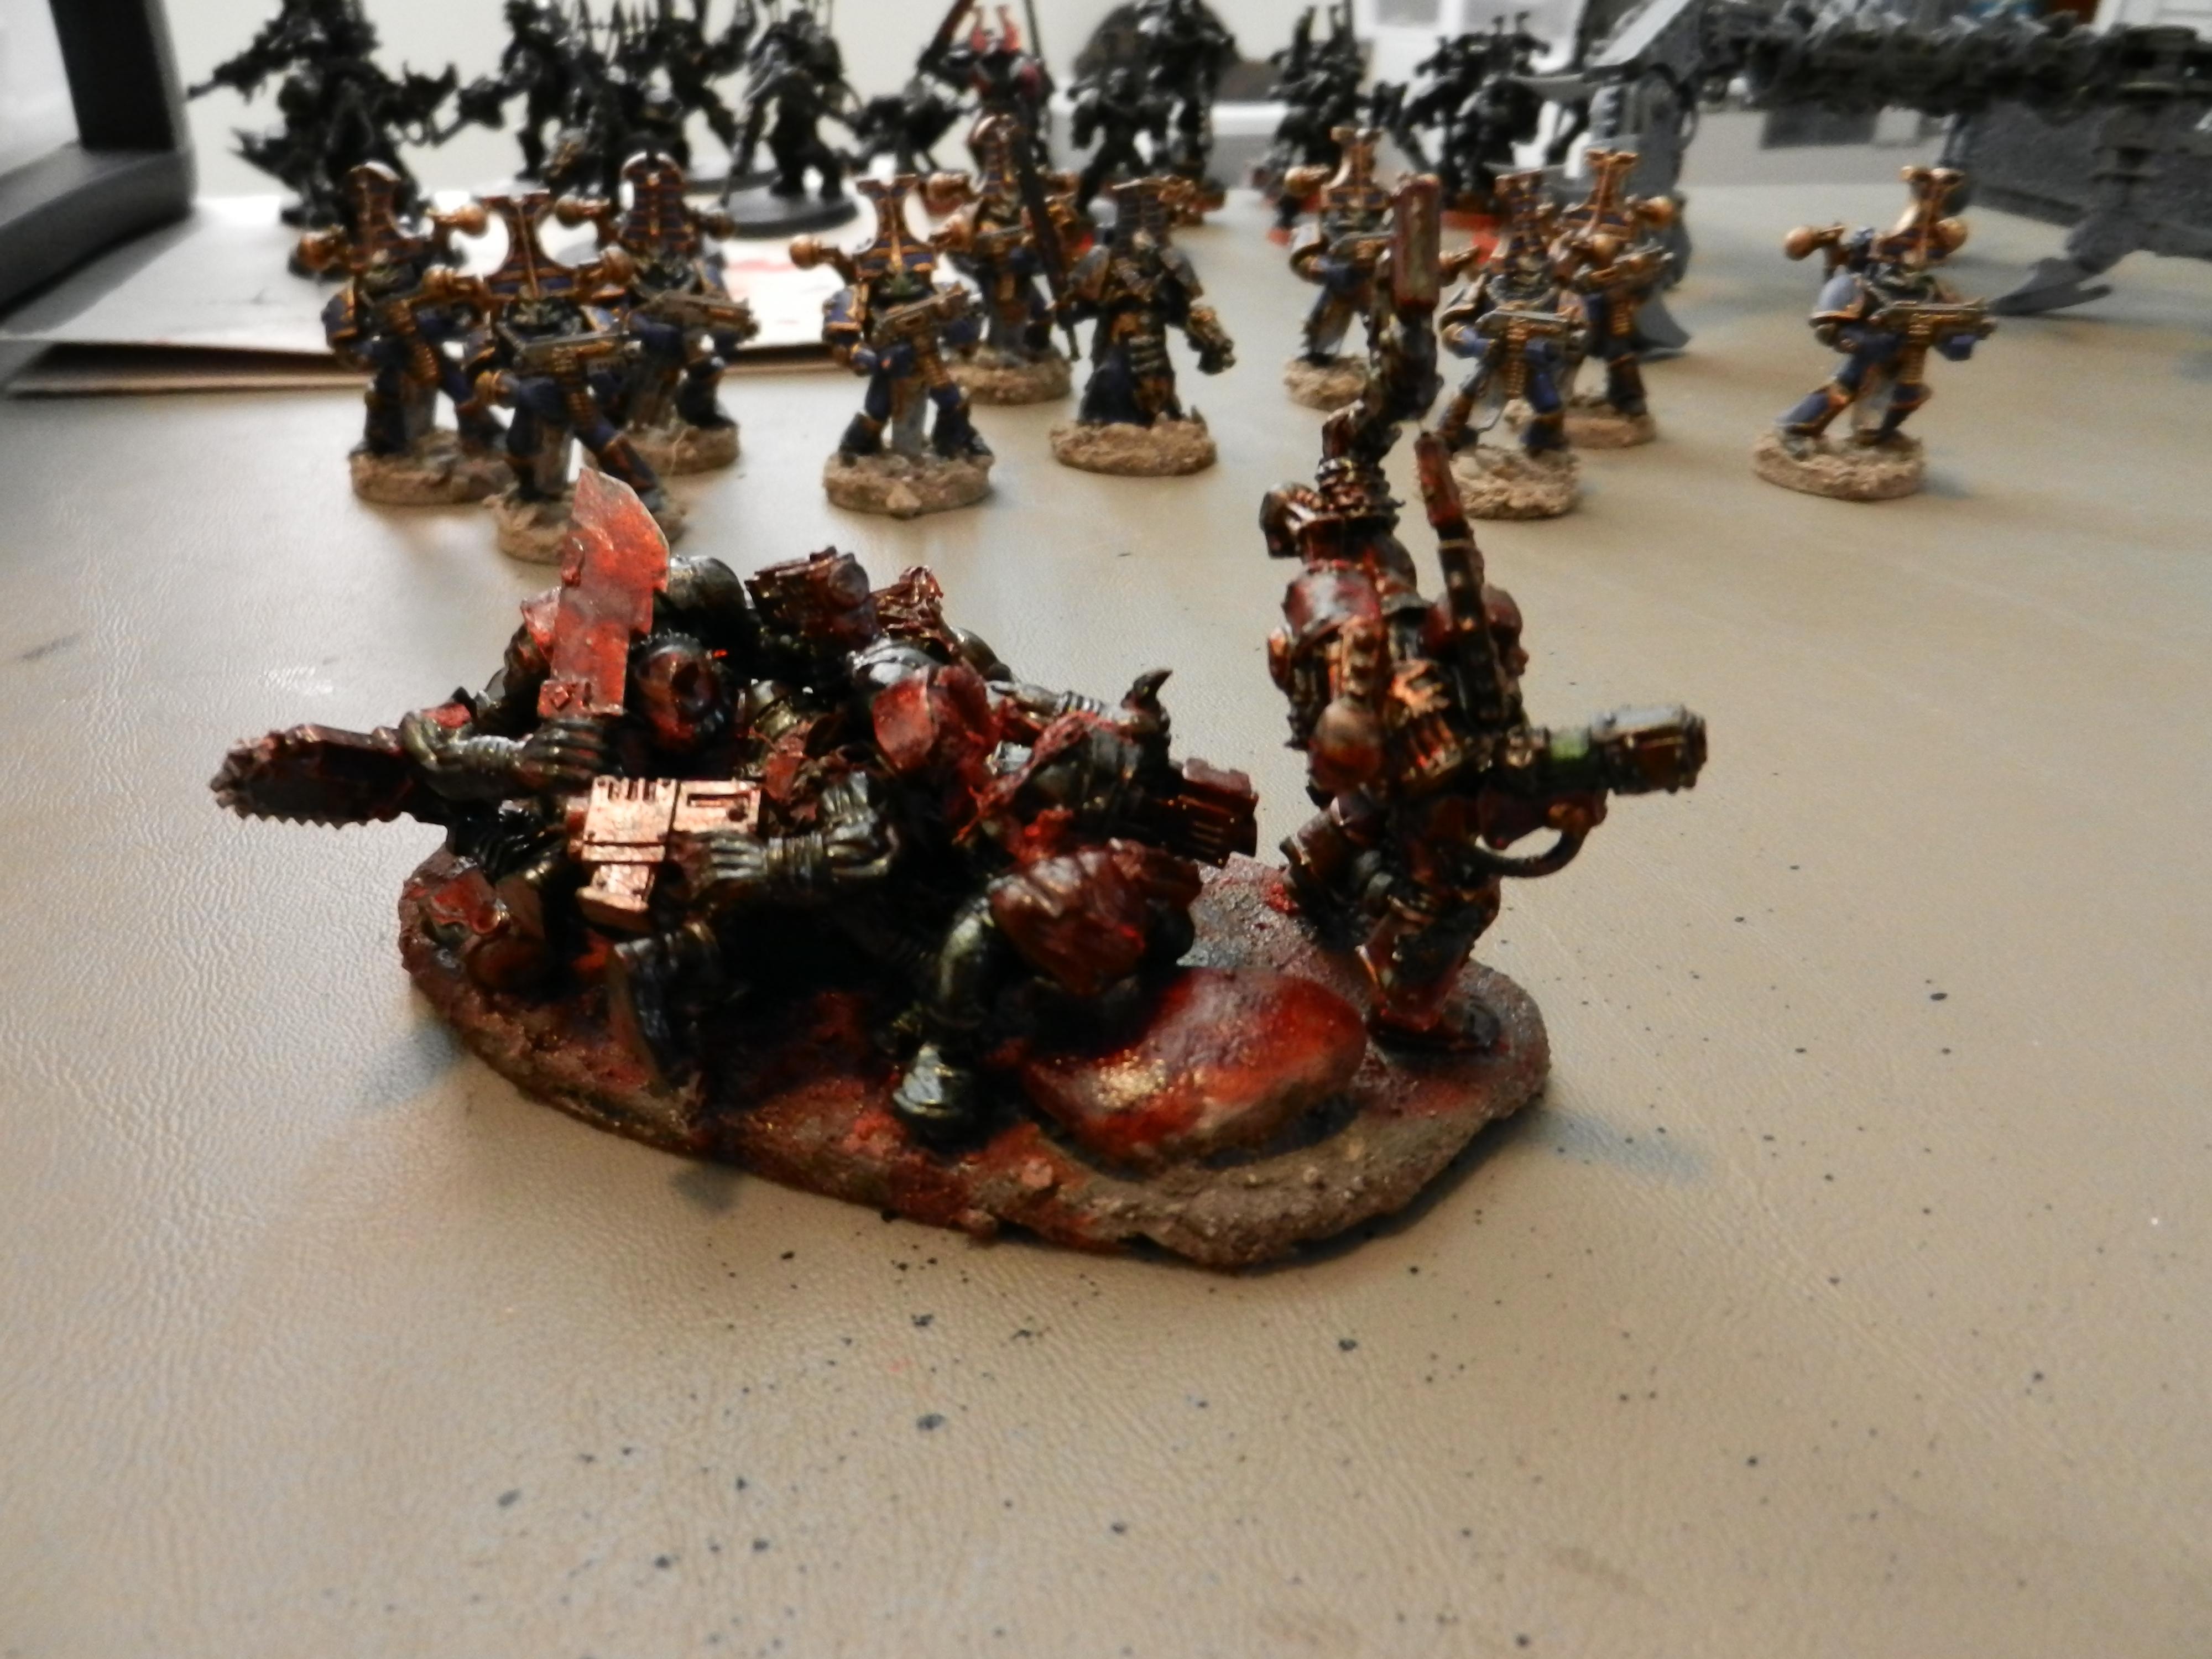 Kharn The Betrayer, Pile Of Bodies, Slaughter, Warhammer 40,000